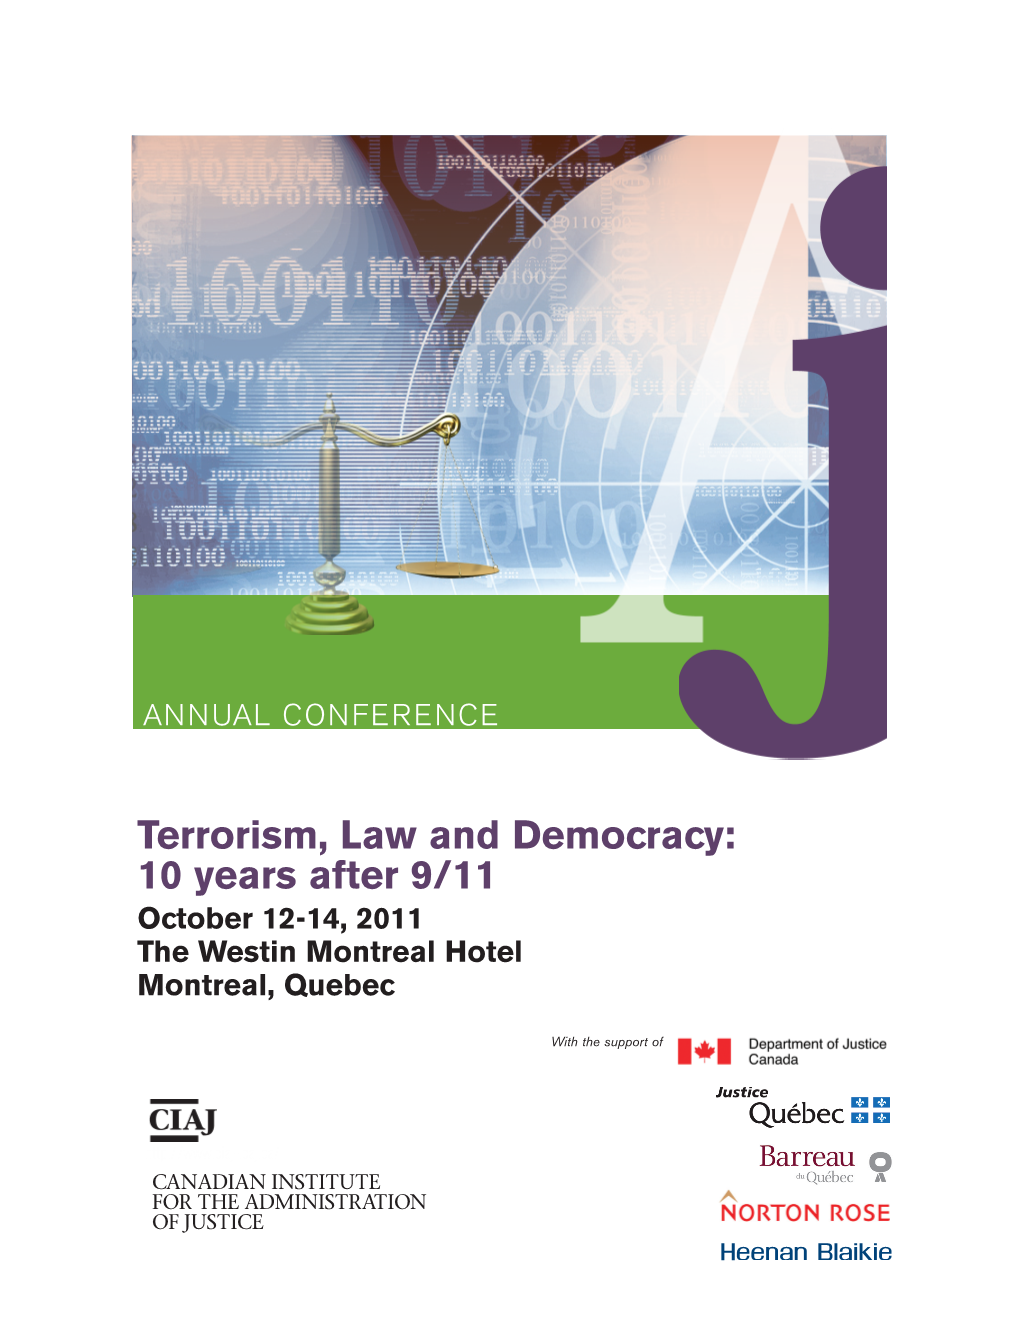 Terrorism, Law and Democracy: 10 Years After 9/11 October 12-14, 2011 the Westin Montreal Hotel Montreal, Quebec